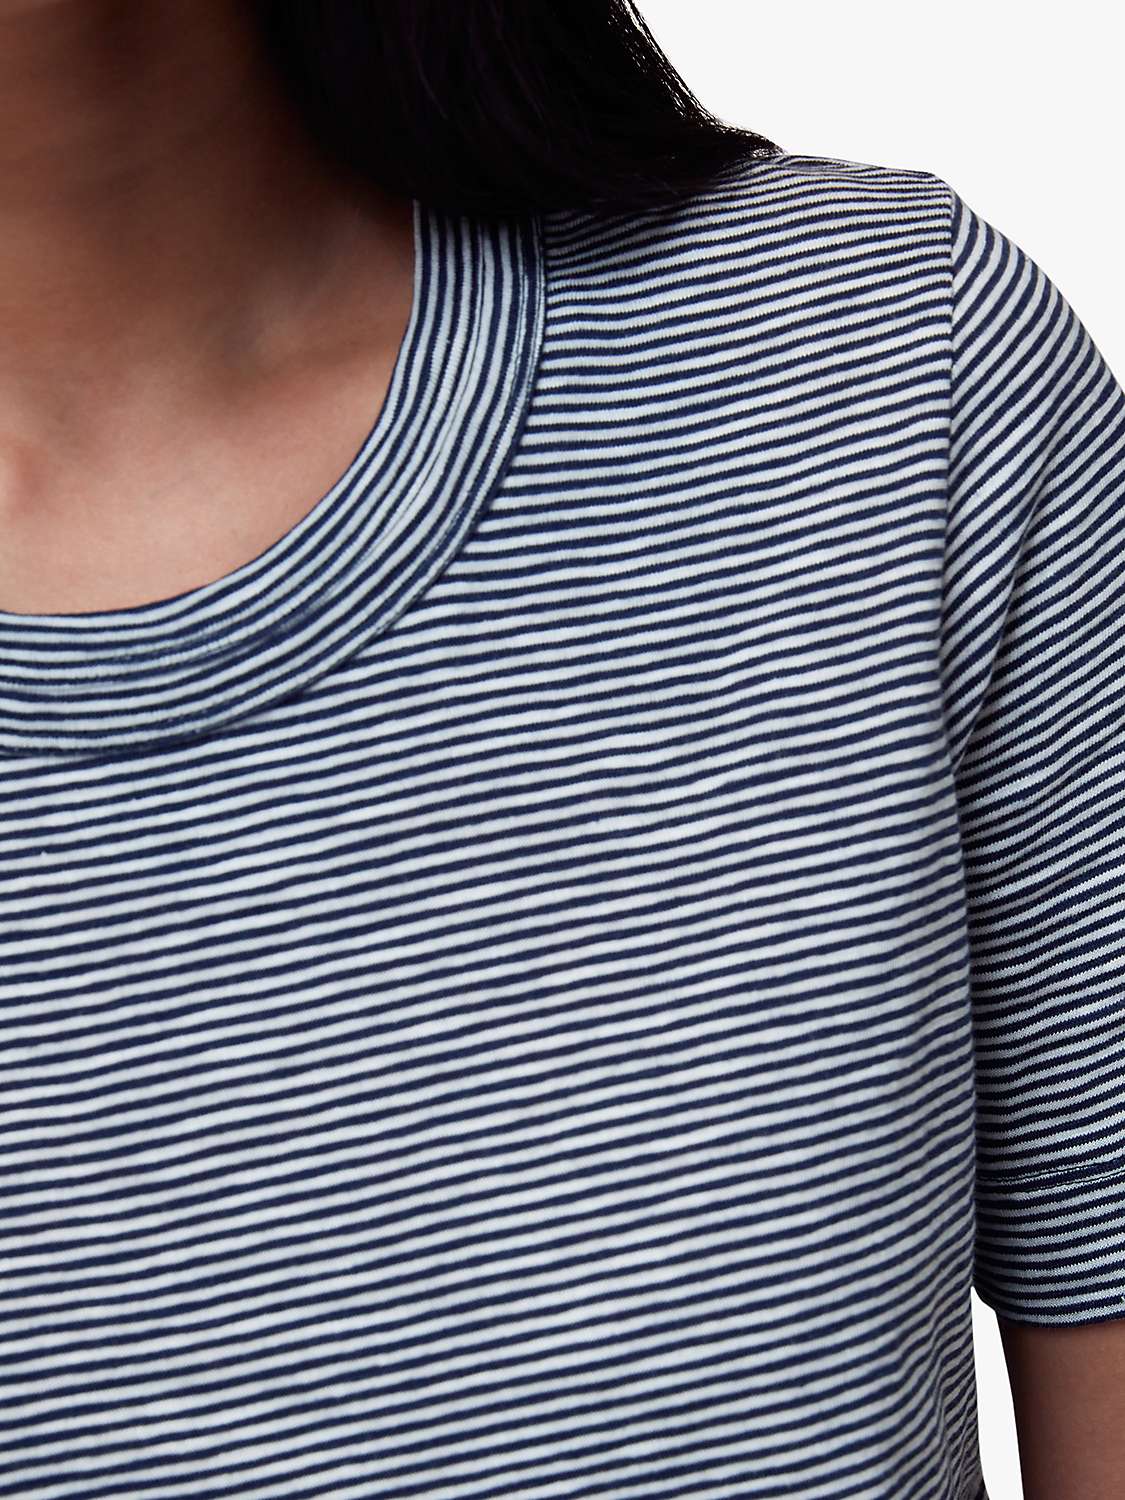 Buy Whistles Rosa Double Trim Striped Cotton T-Shirt Online at johnlewis.com